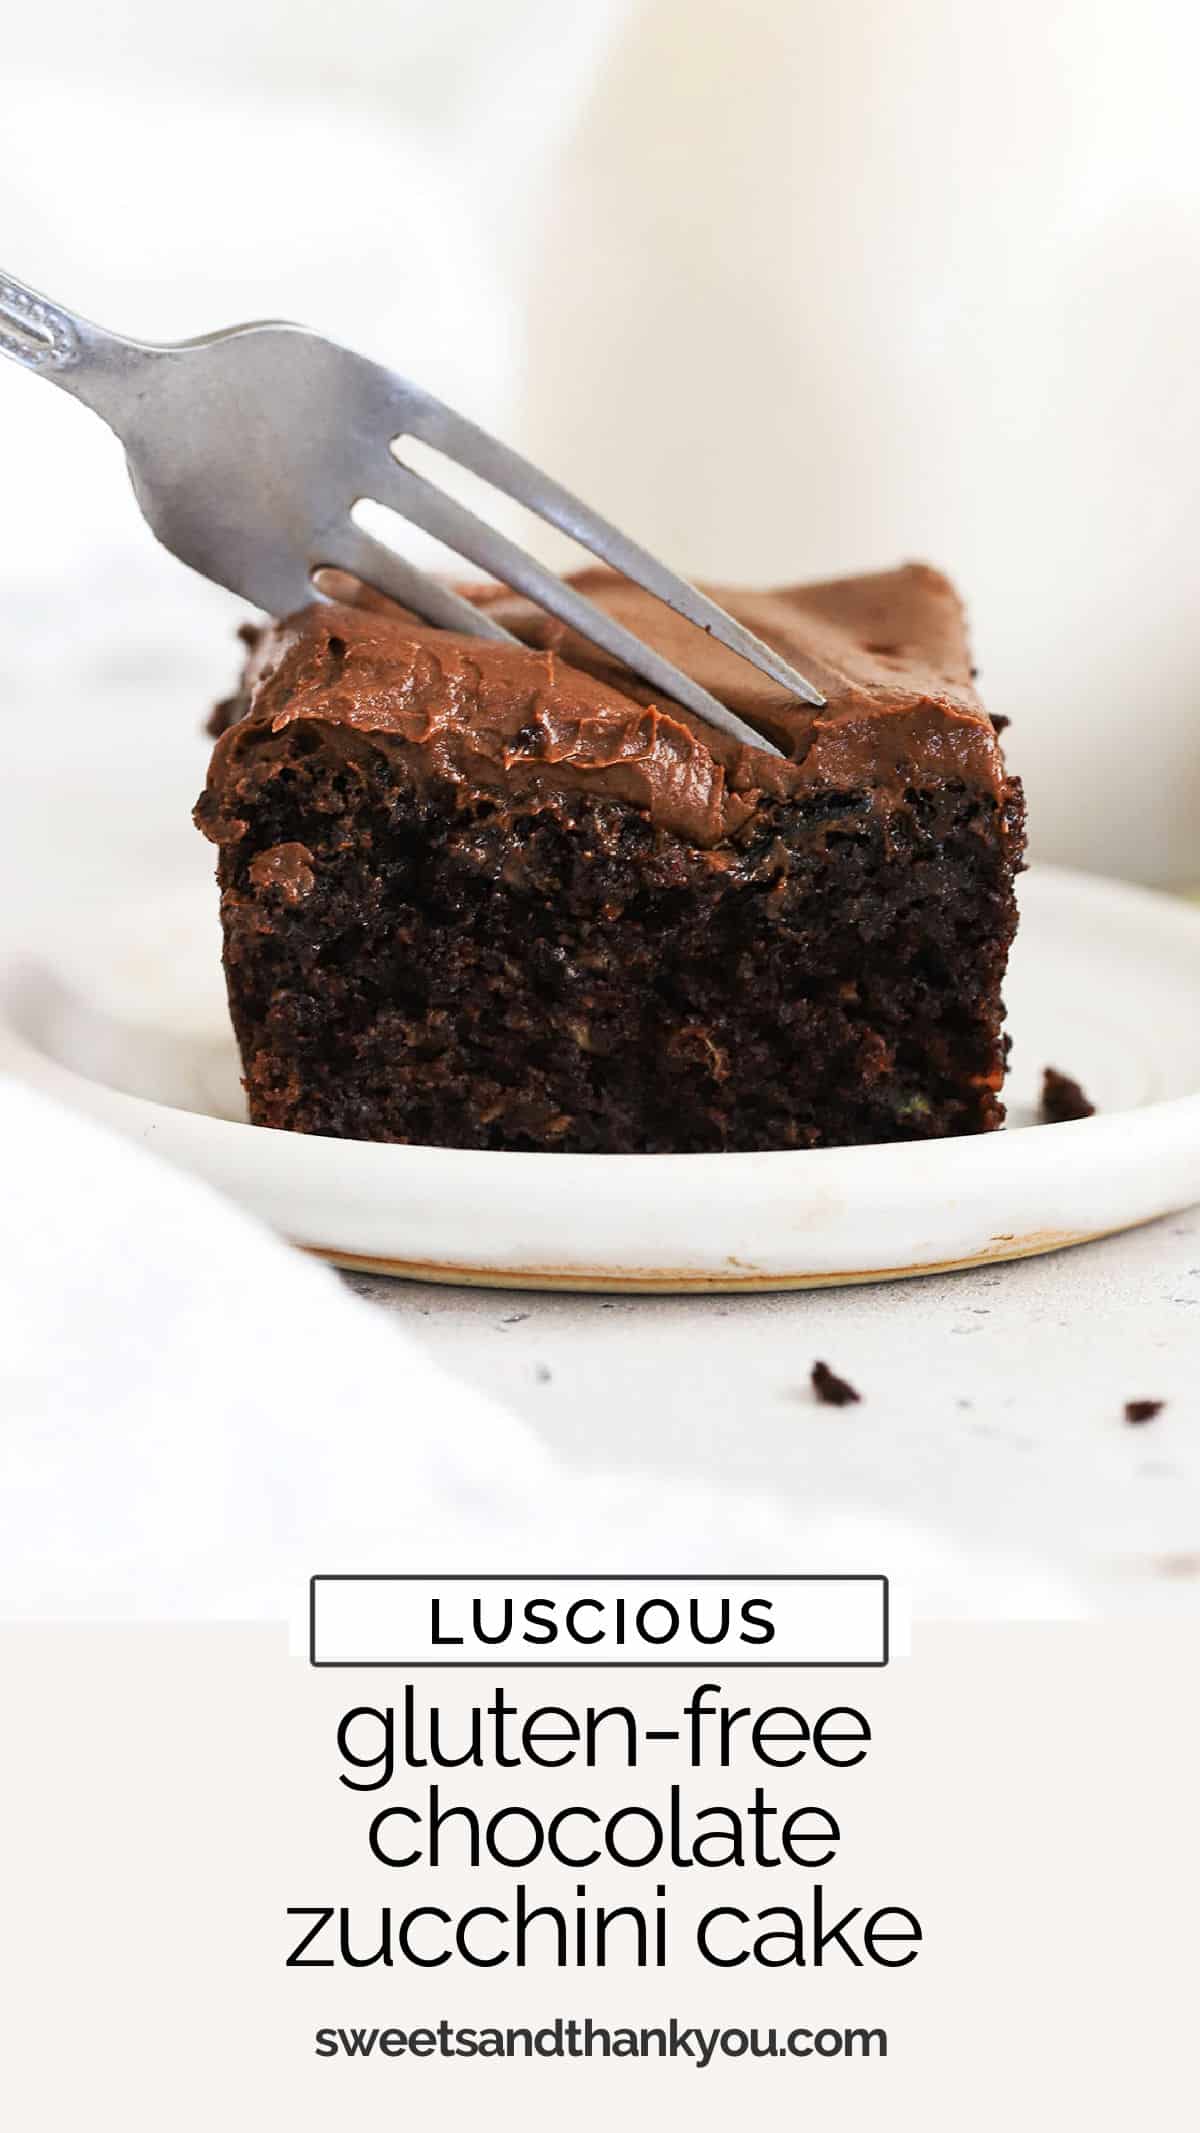 This easy Gluten-Free Chocolate Zucchini Cake recipe is so plush and delicious no one will guess it's gluten-free. (You'll LOVE the chocolate frosting!) / gluten free chocolate zucchini cake with chocolate frosting / gluten free chocolate zucchini sheet cake / gluten free chocolate sheet cake / easy gluten free cake recipe / gluten-free zucchini cake recipe / chocolate frosting for zucchini cake / zucchini sheet cake / gluten free zucchini sheet cake